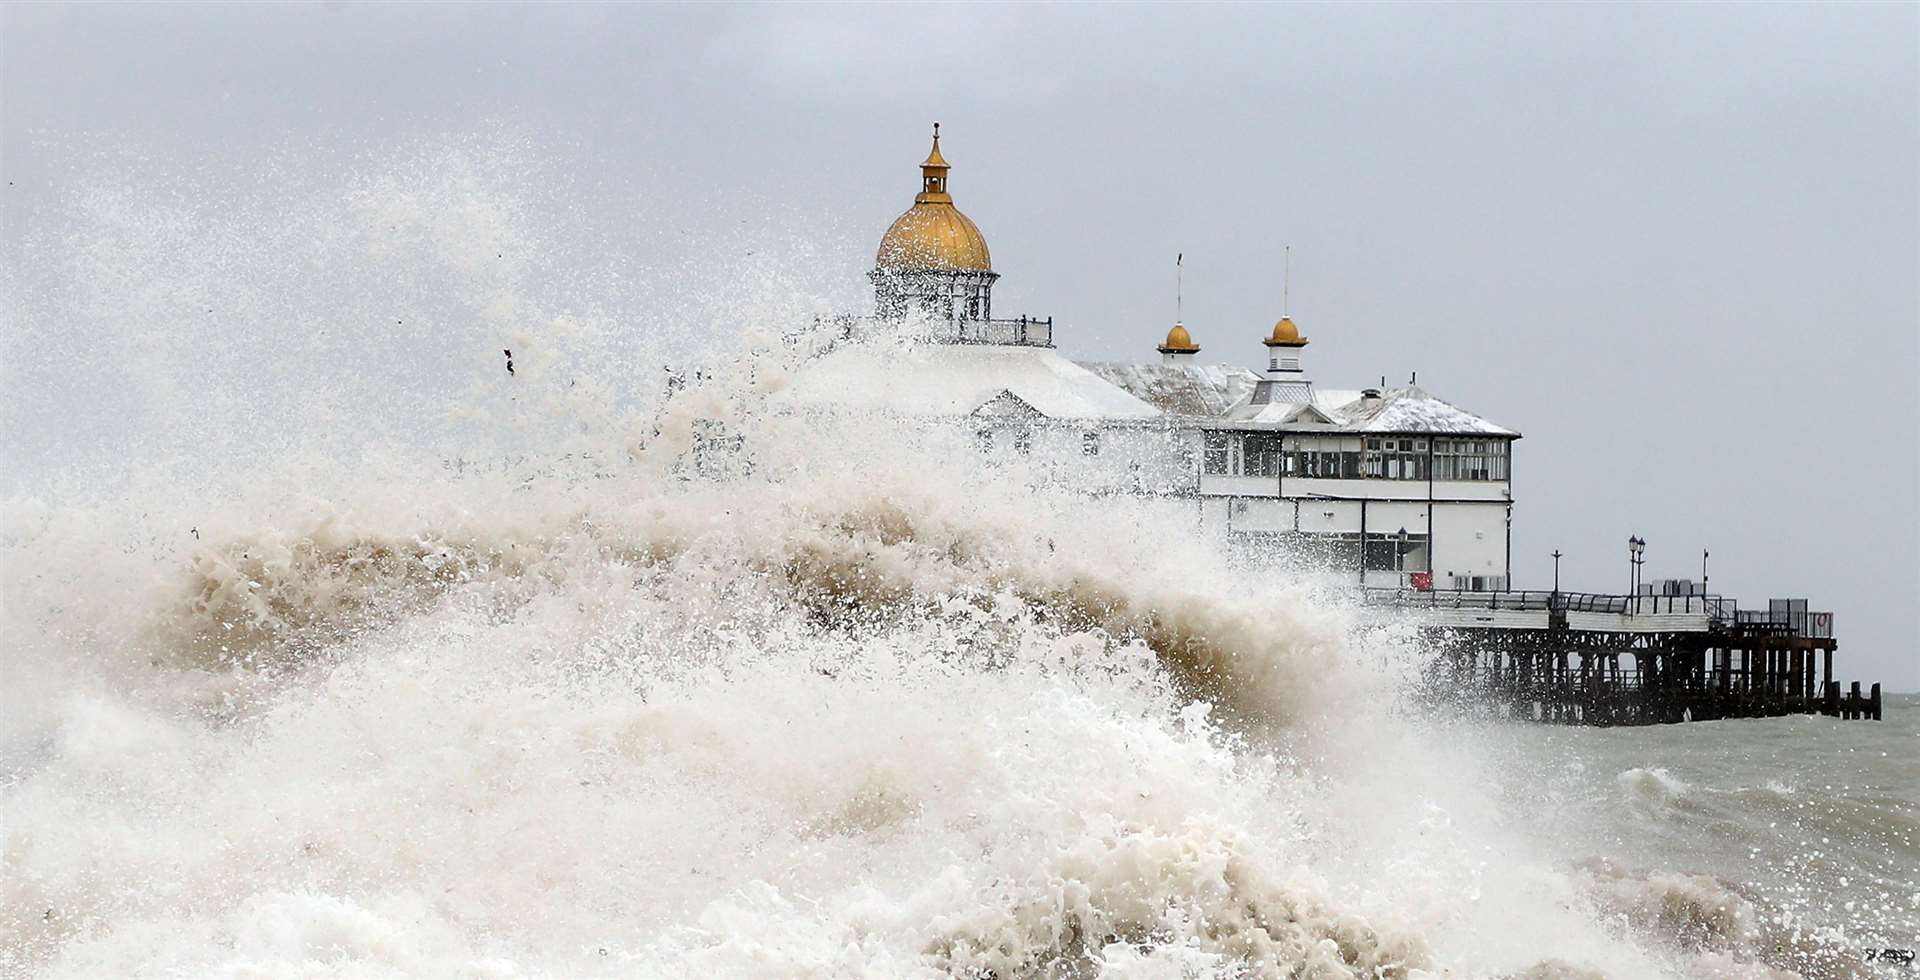 Waves crash near the pier in Eastbourne in August (Gareth Fuller/PA)